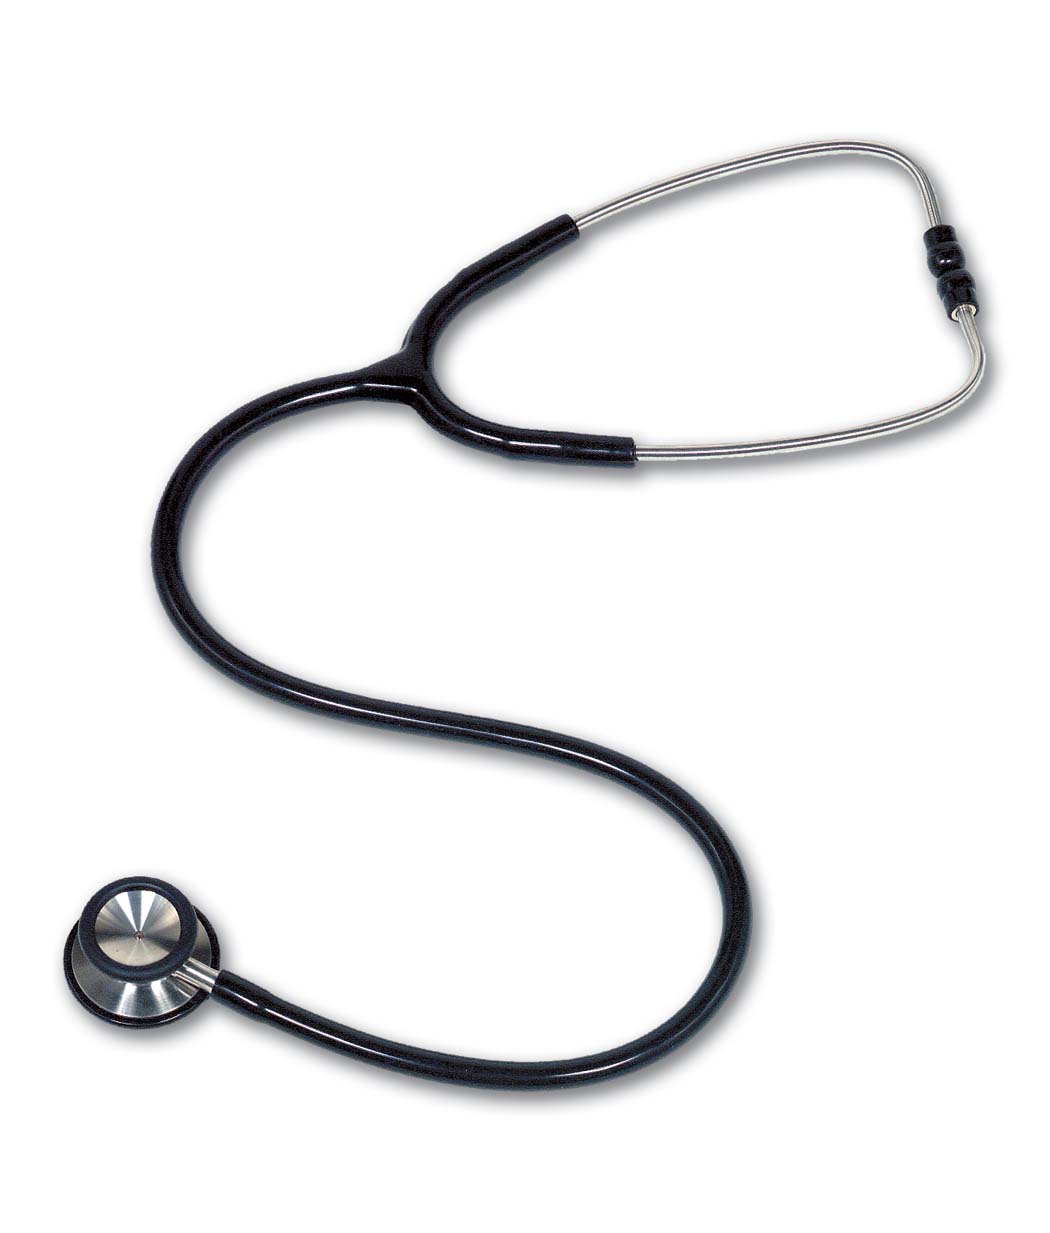 Stethoscope clipart 8